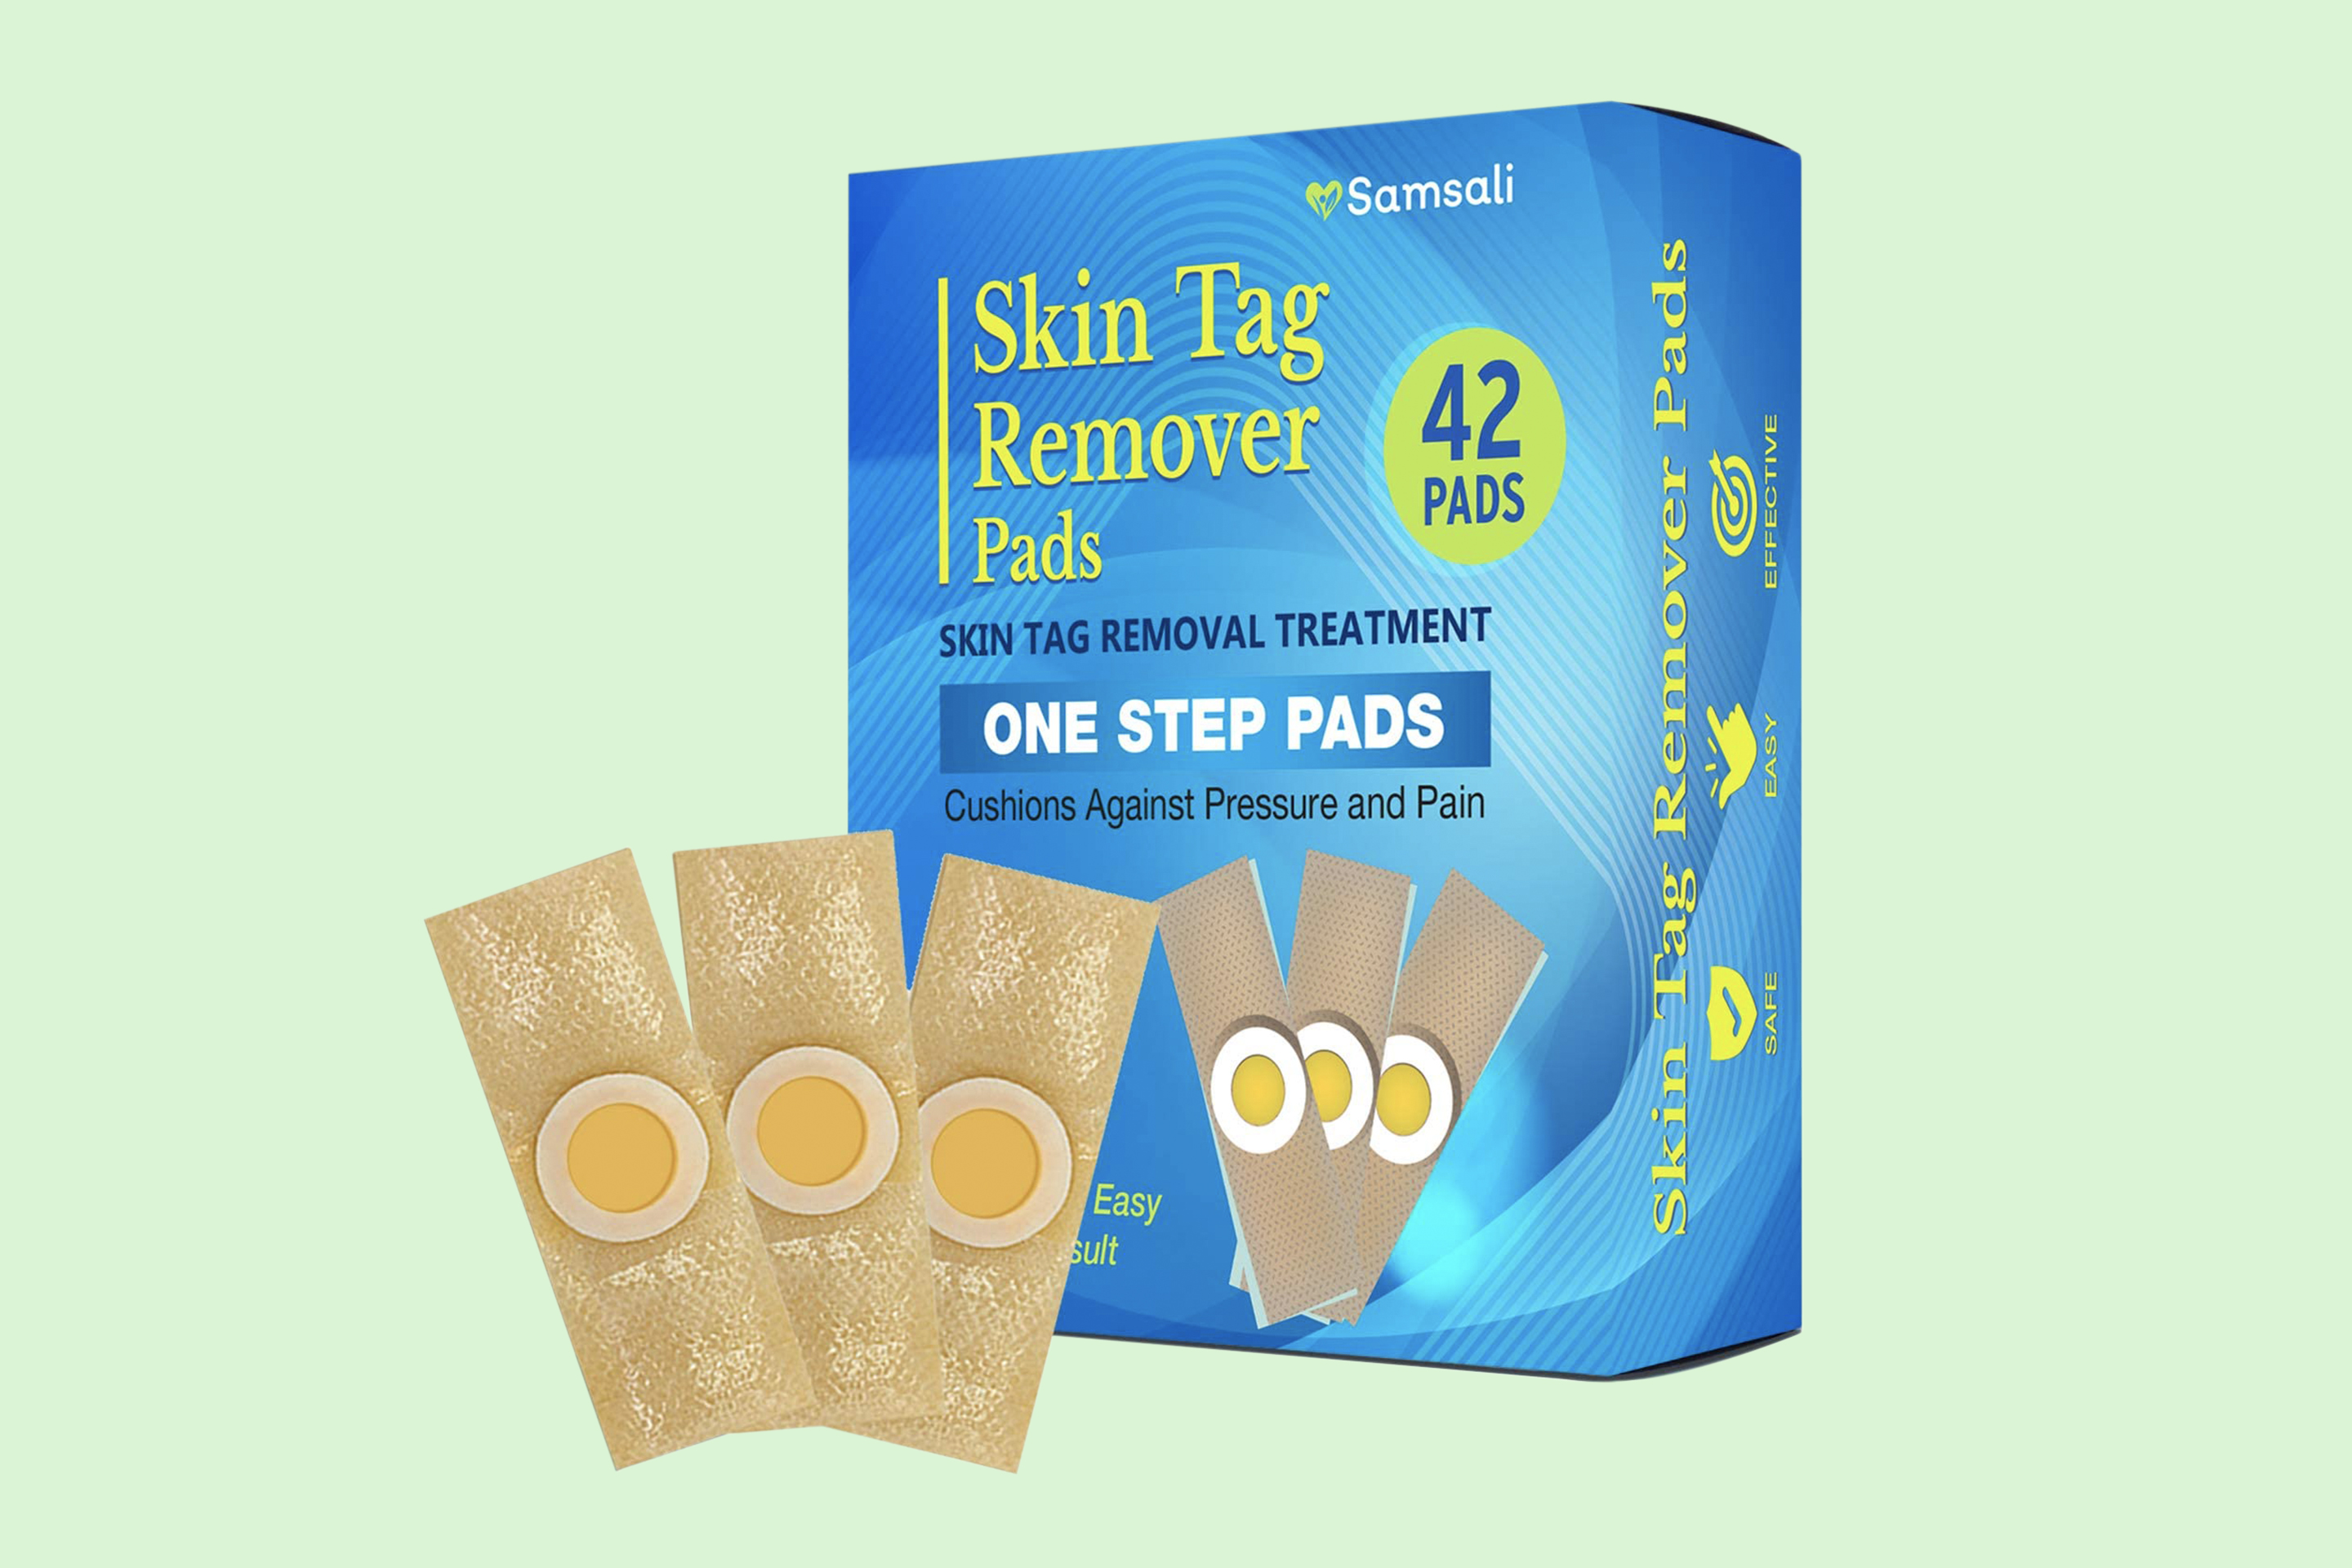 Skin Tag Remover Pads